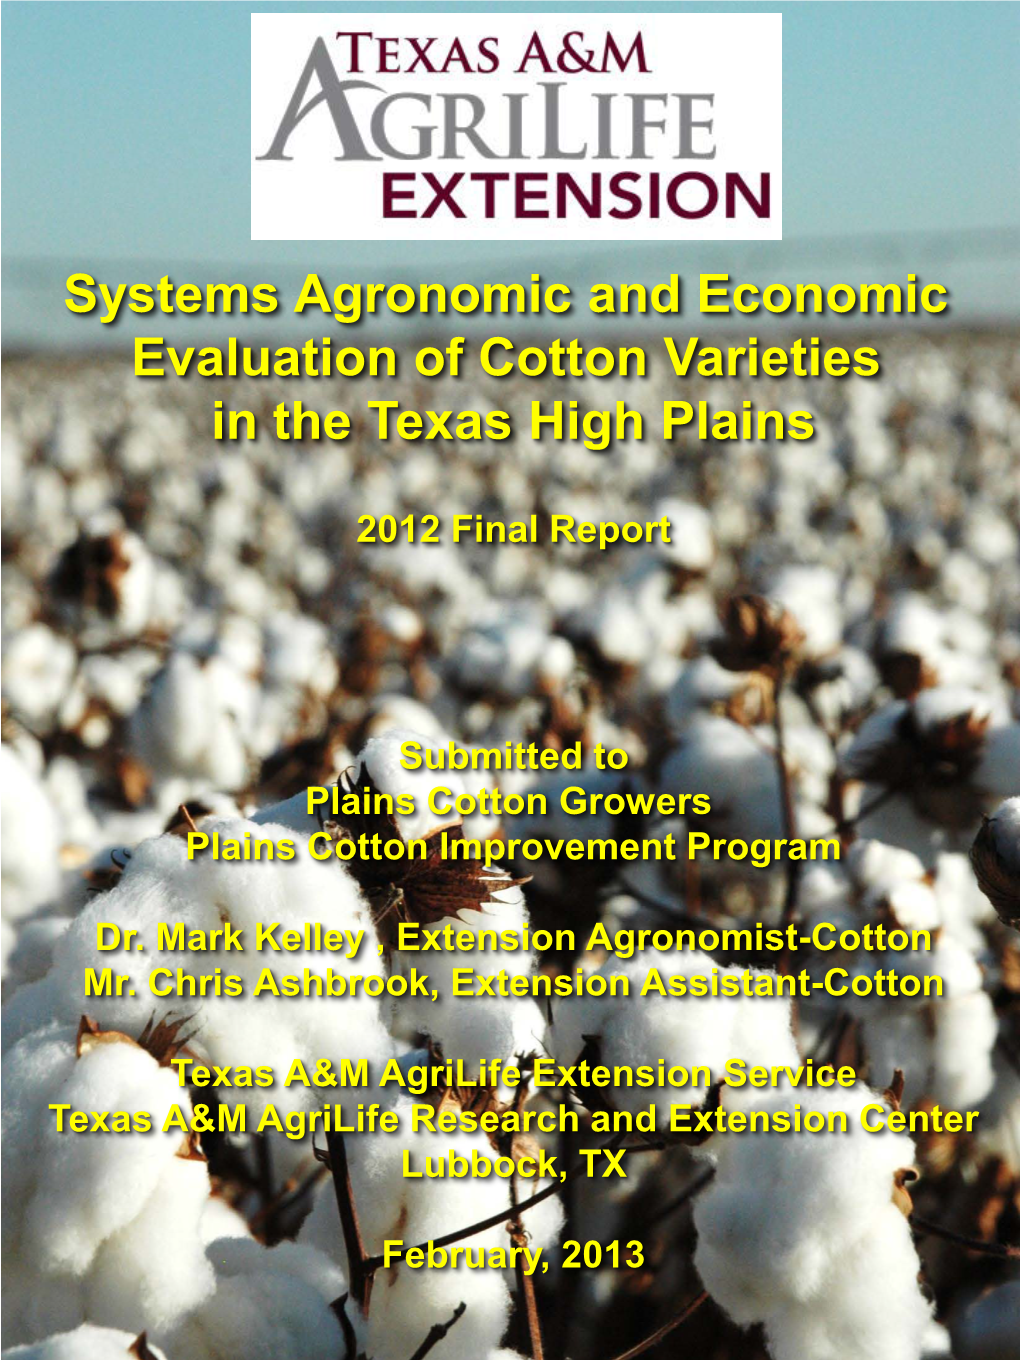 Systems Agronomic and Economic Evaluation of Cotton Varieties in the Texas High Plains